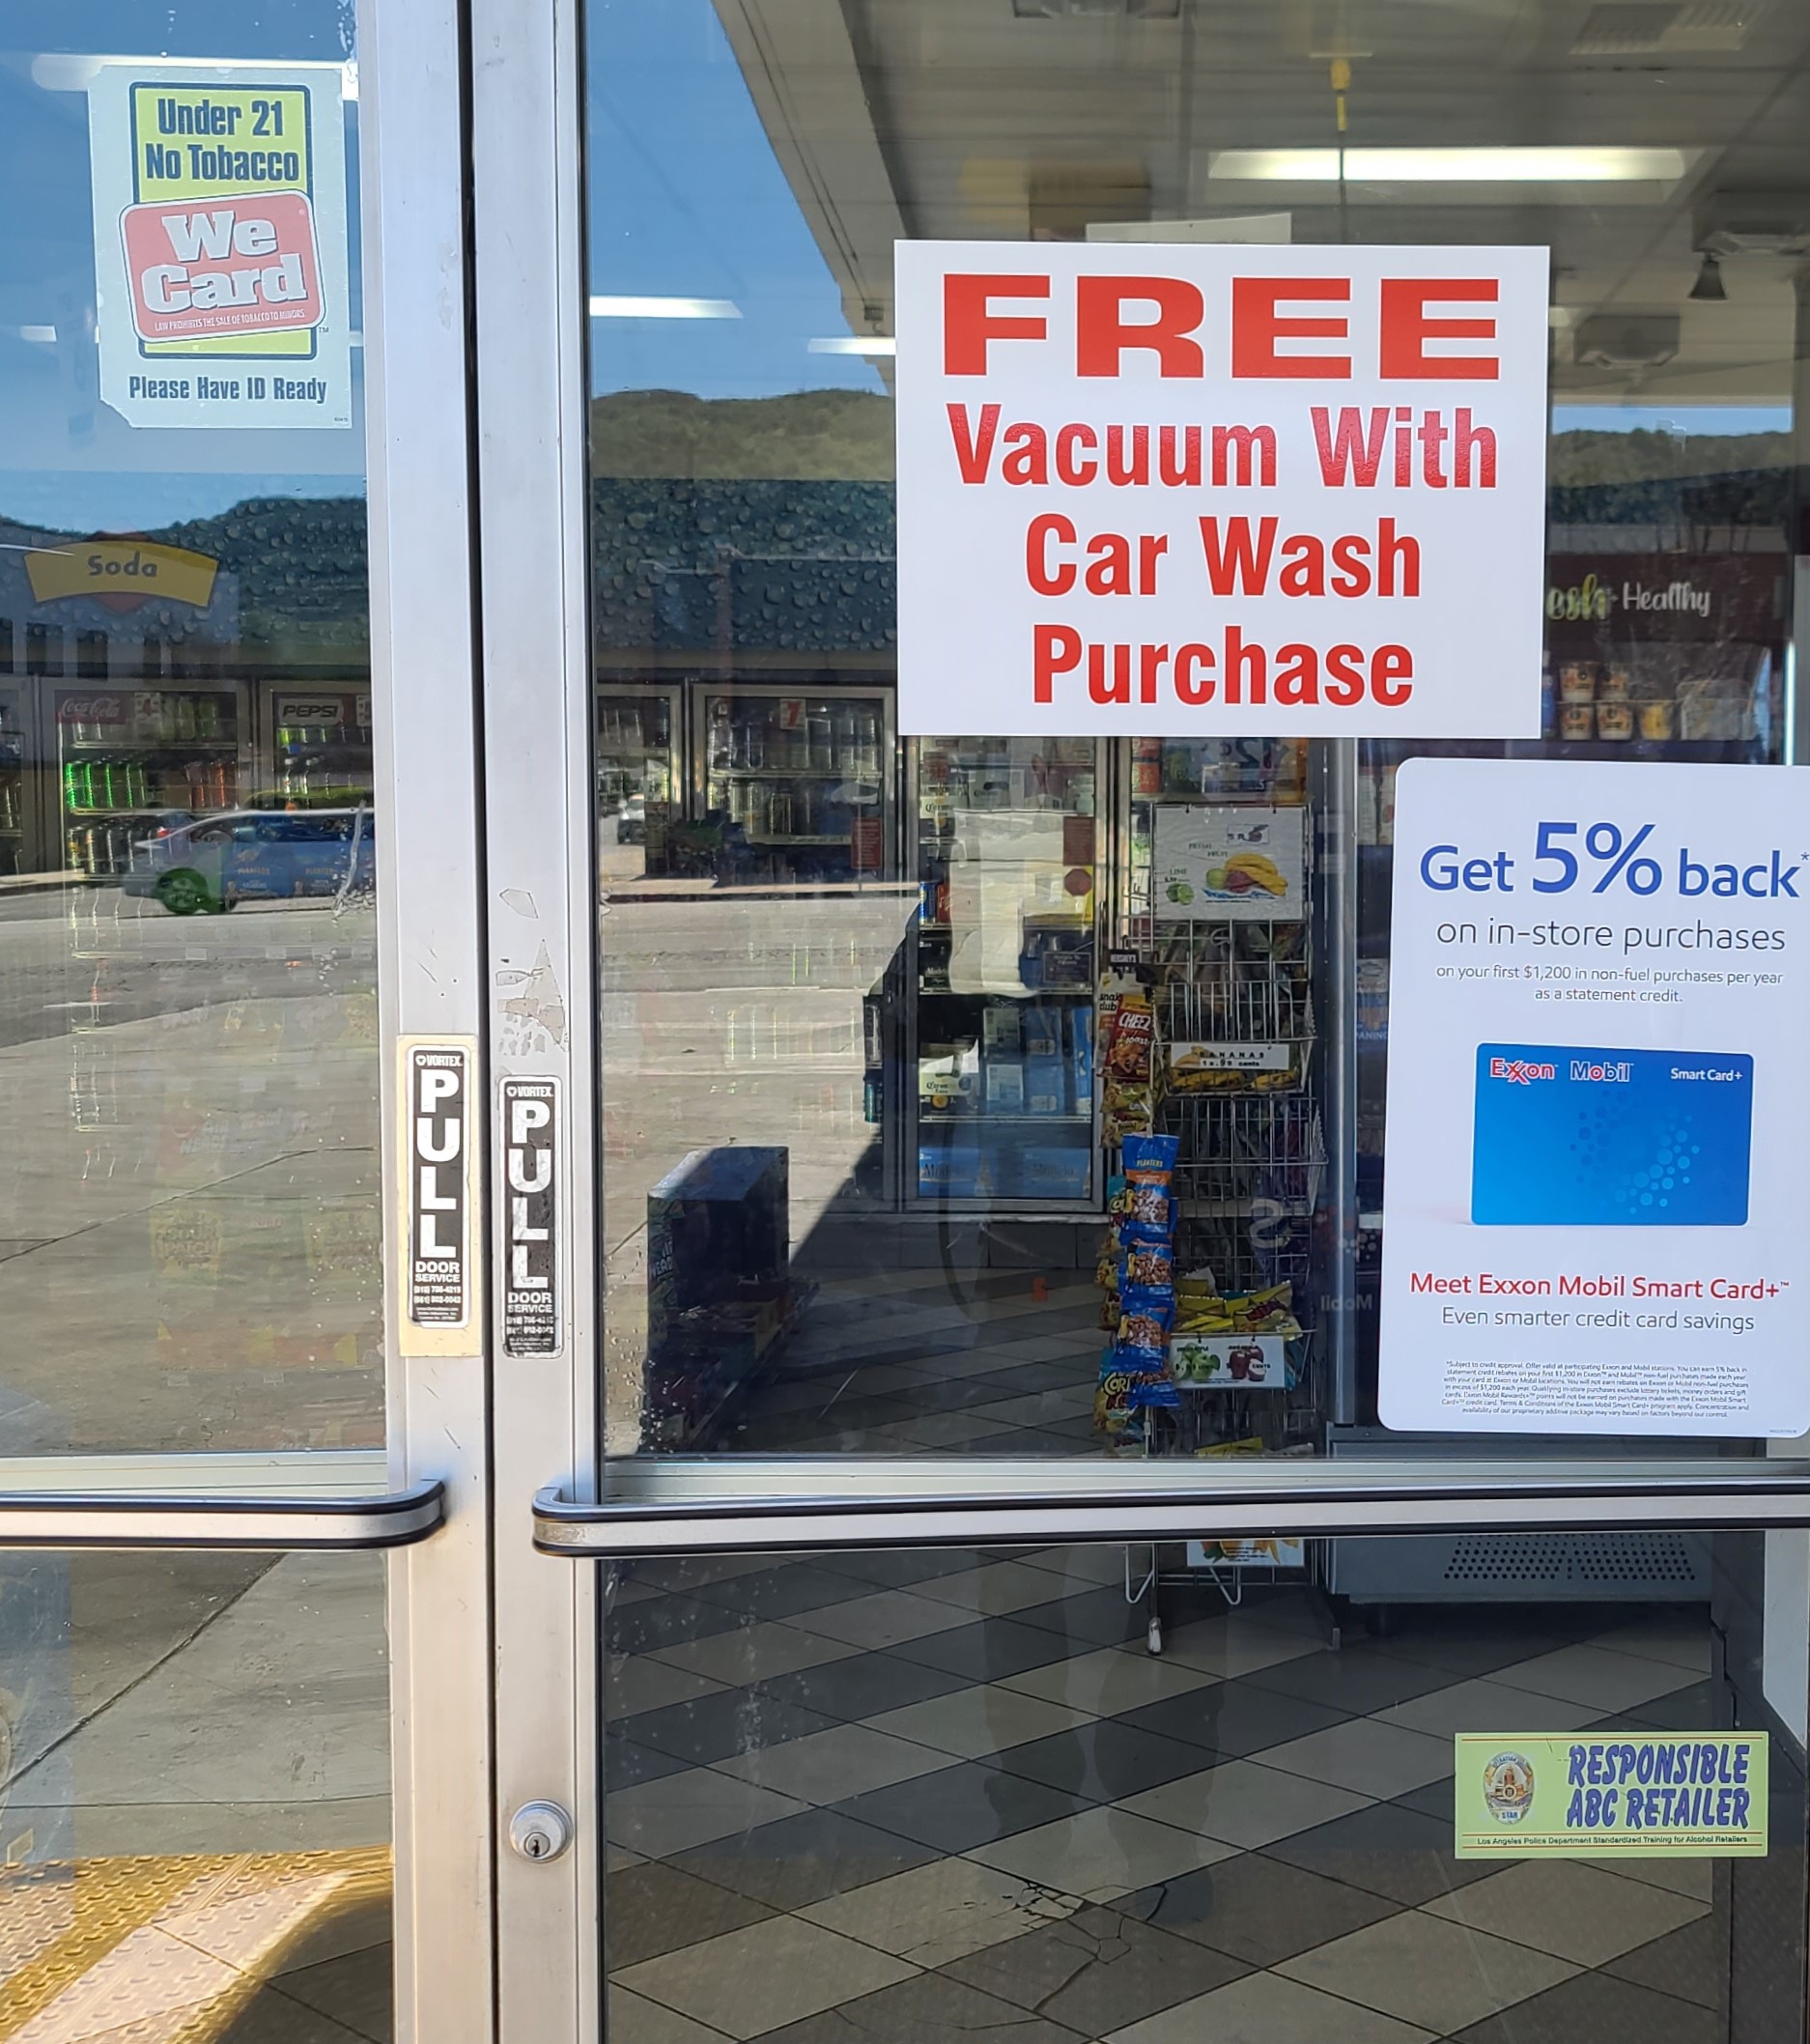 The advertisement window stickers for Mobil Express Car Wash in Sunland promotes their free vacuum service after every car wash.